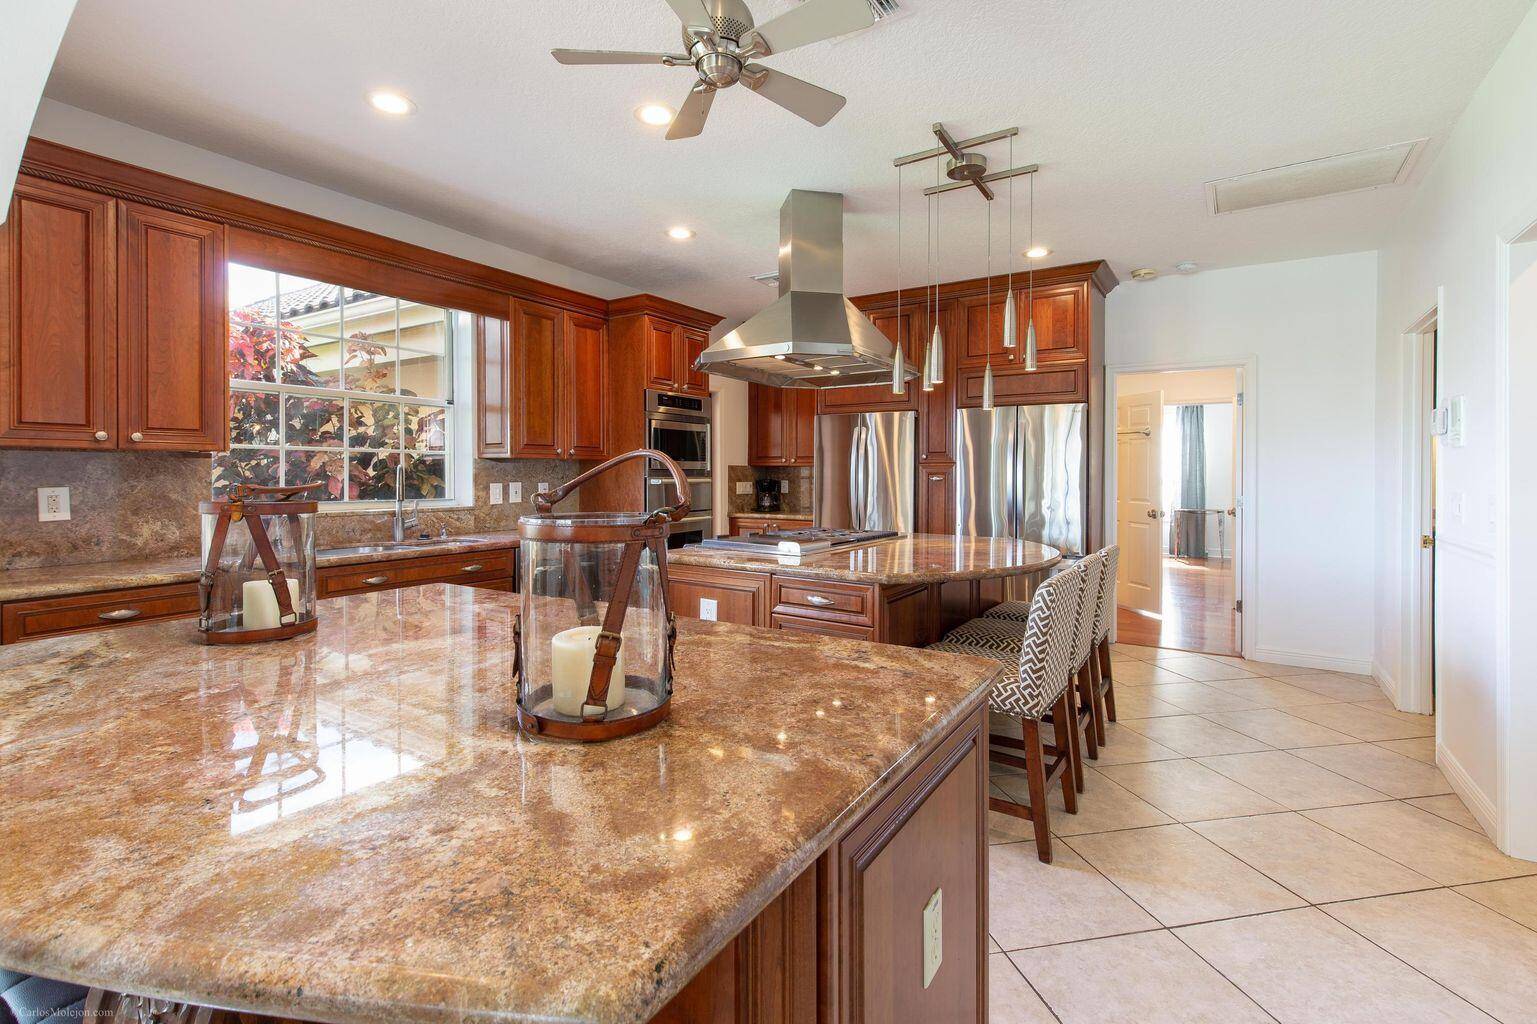 Private 4 bedroom estate home in Palm Beach PointAble to golf cart to WEFUnbranded Virtual Tour https www.